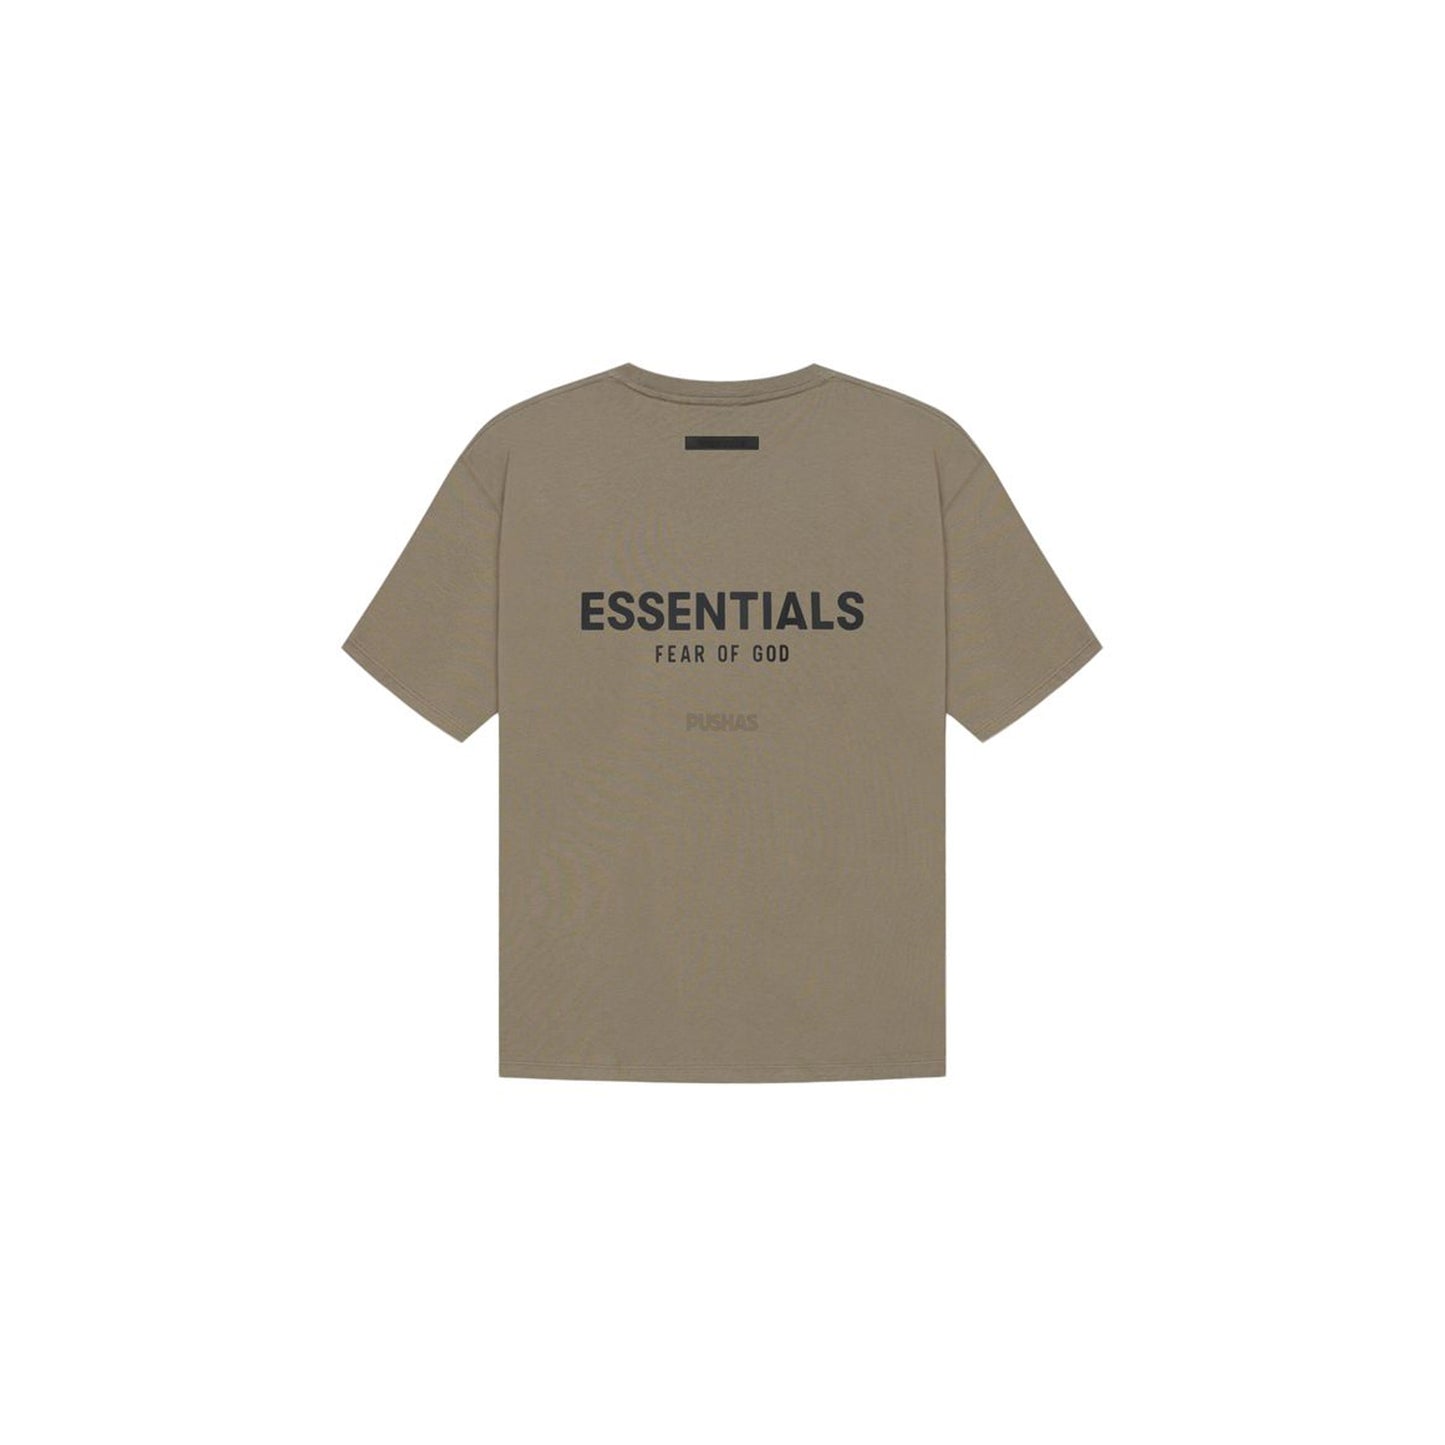 Fear of God Essentials T-shirt 'Taupe' (2021)